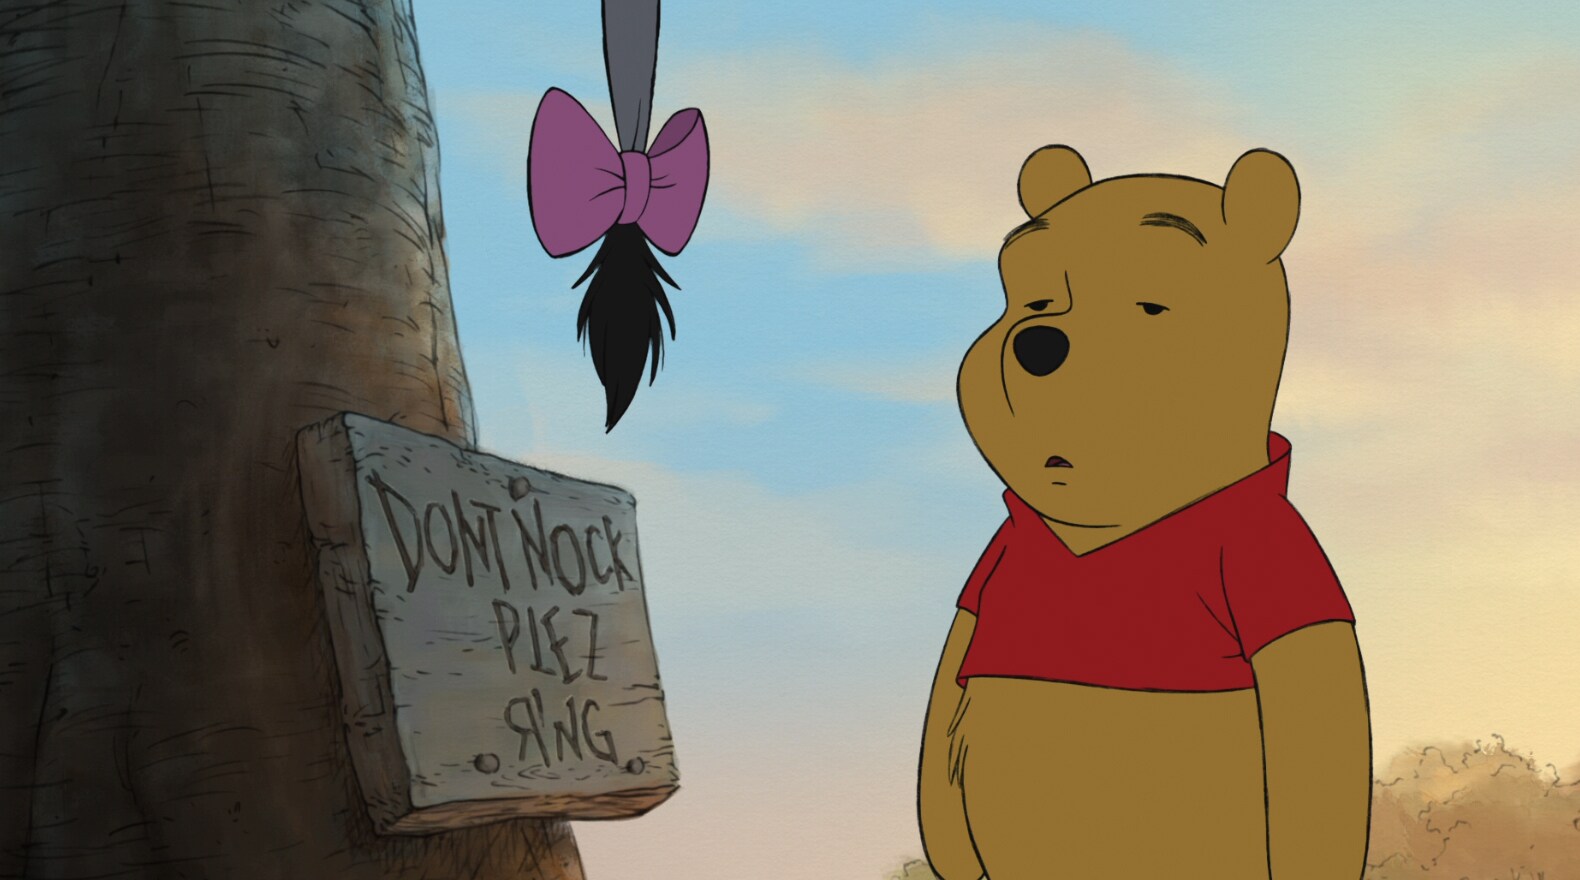 Pooh recognizes this tail from somewhere...